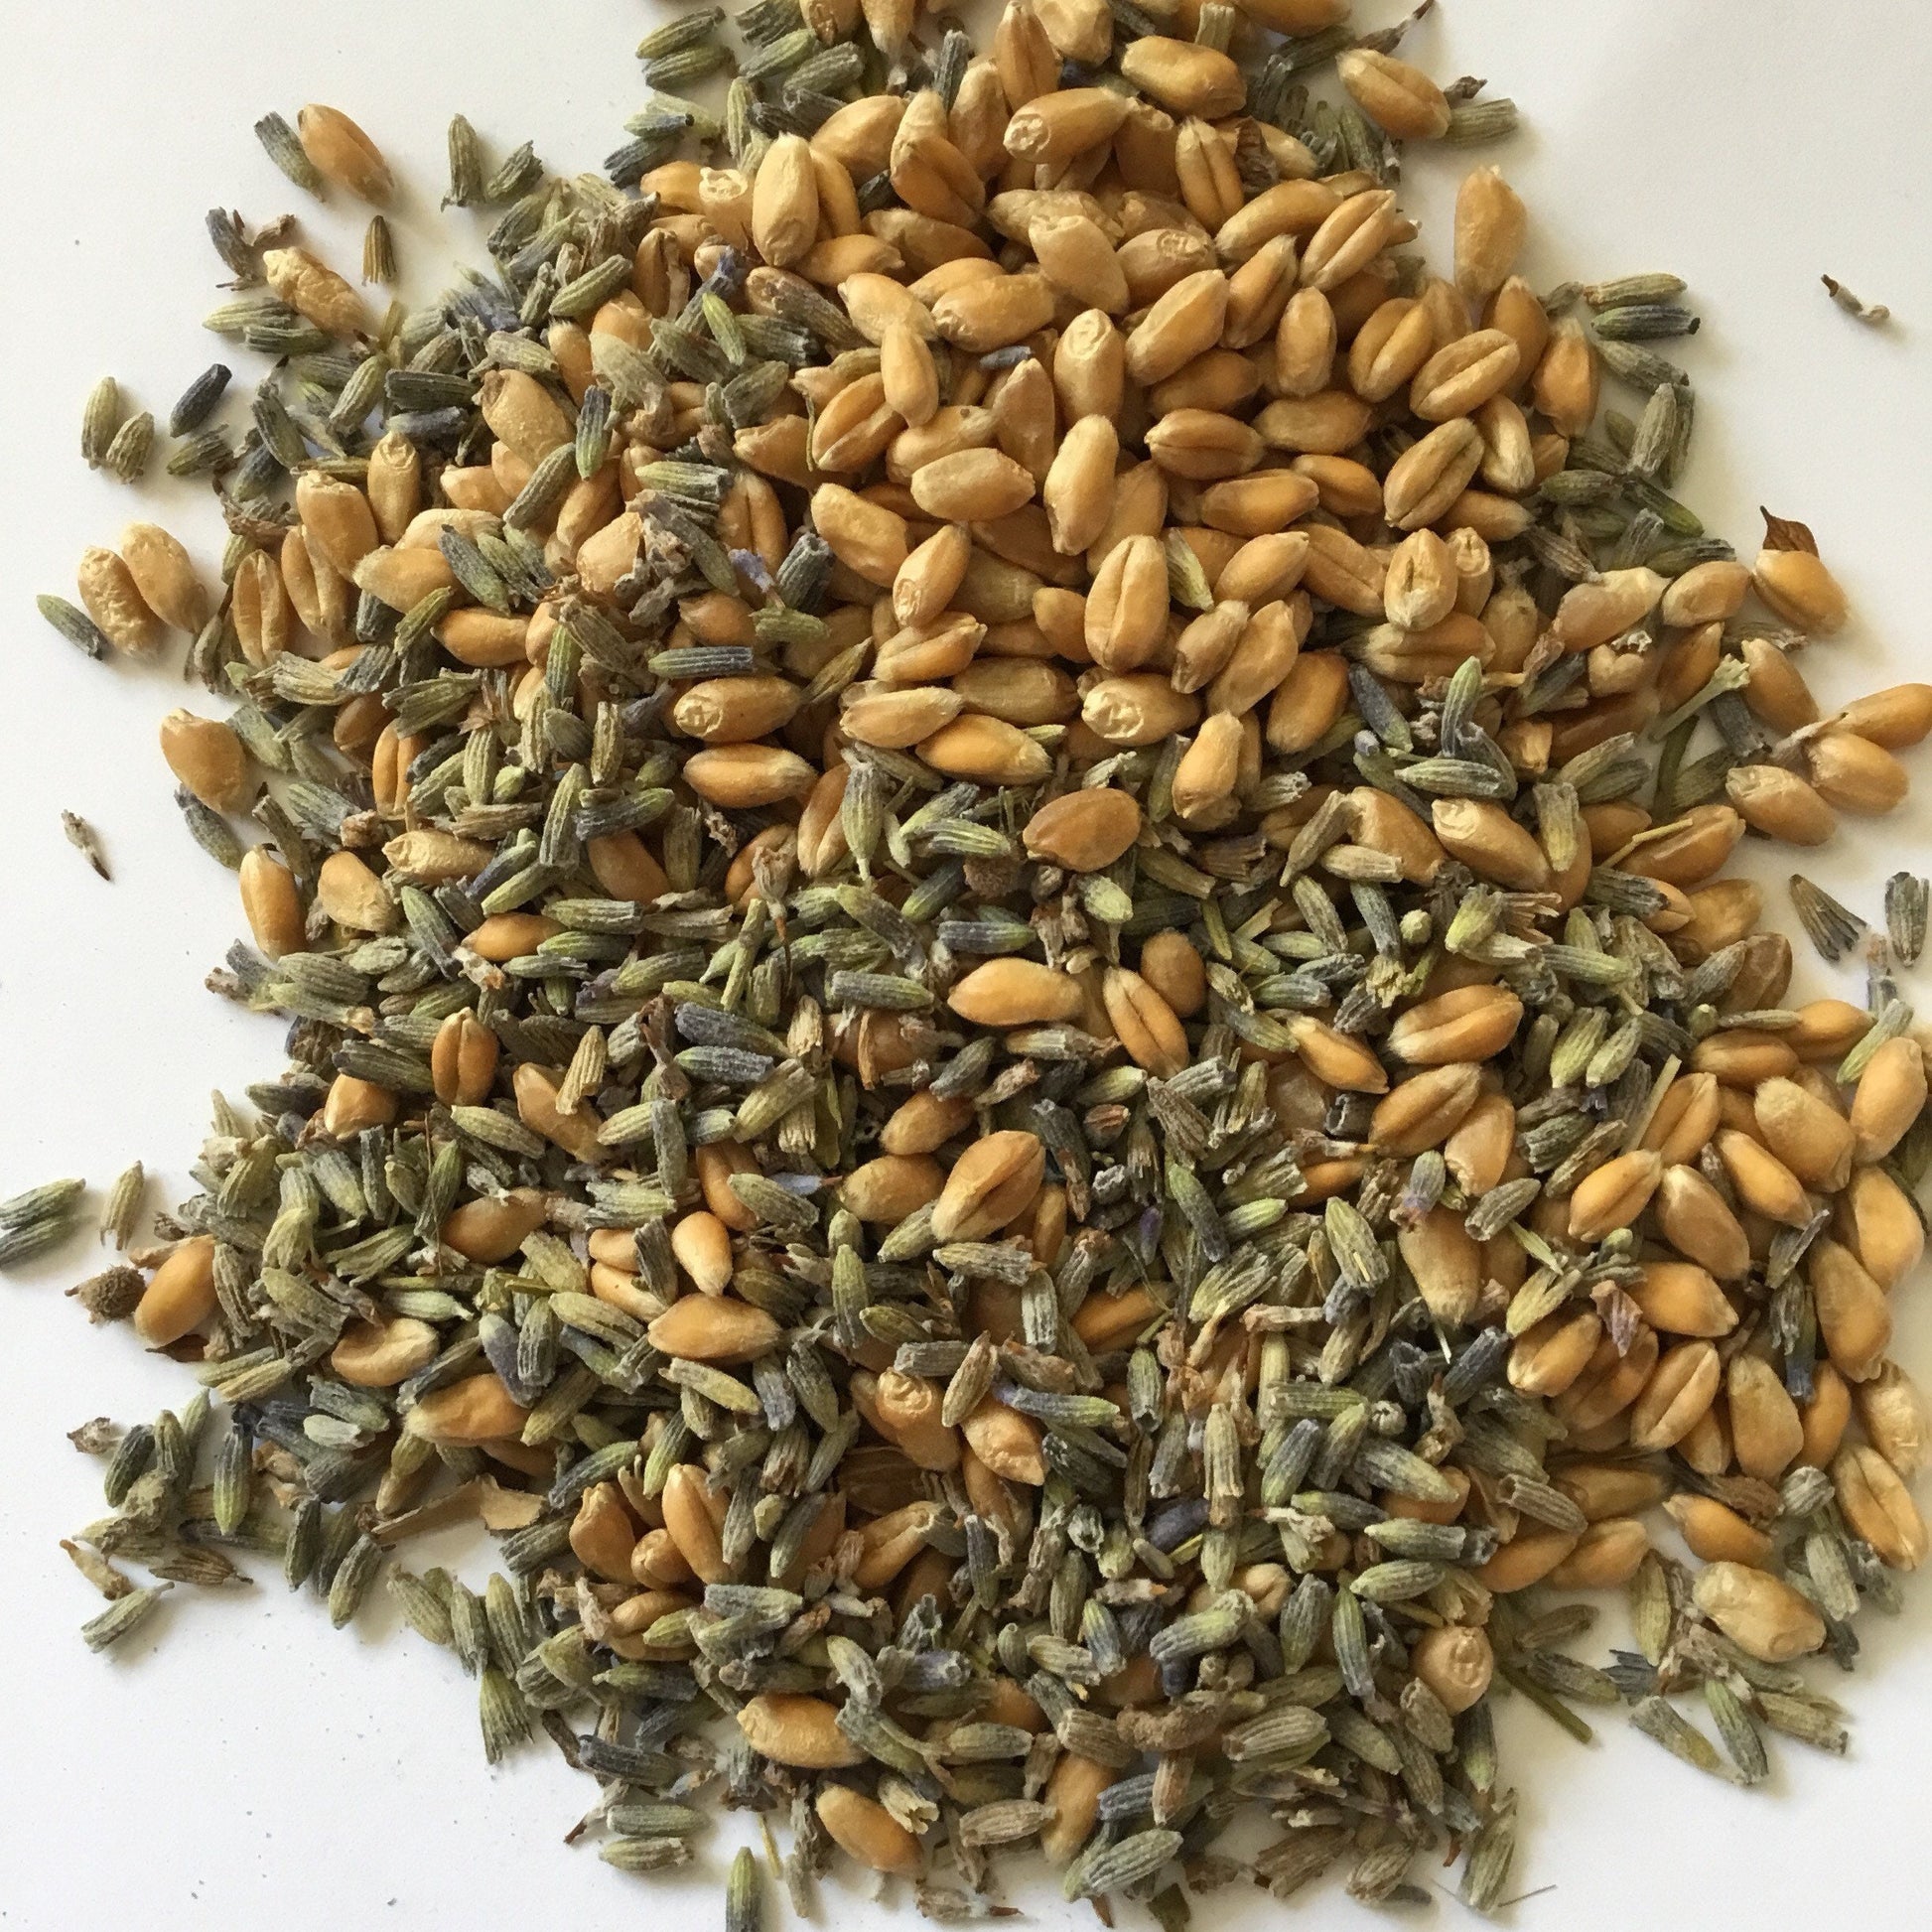 Ingredients for lavender wheat bags